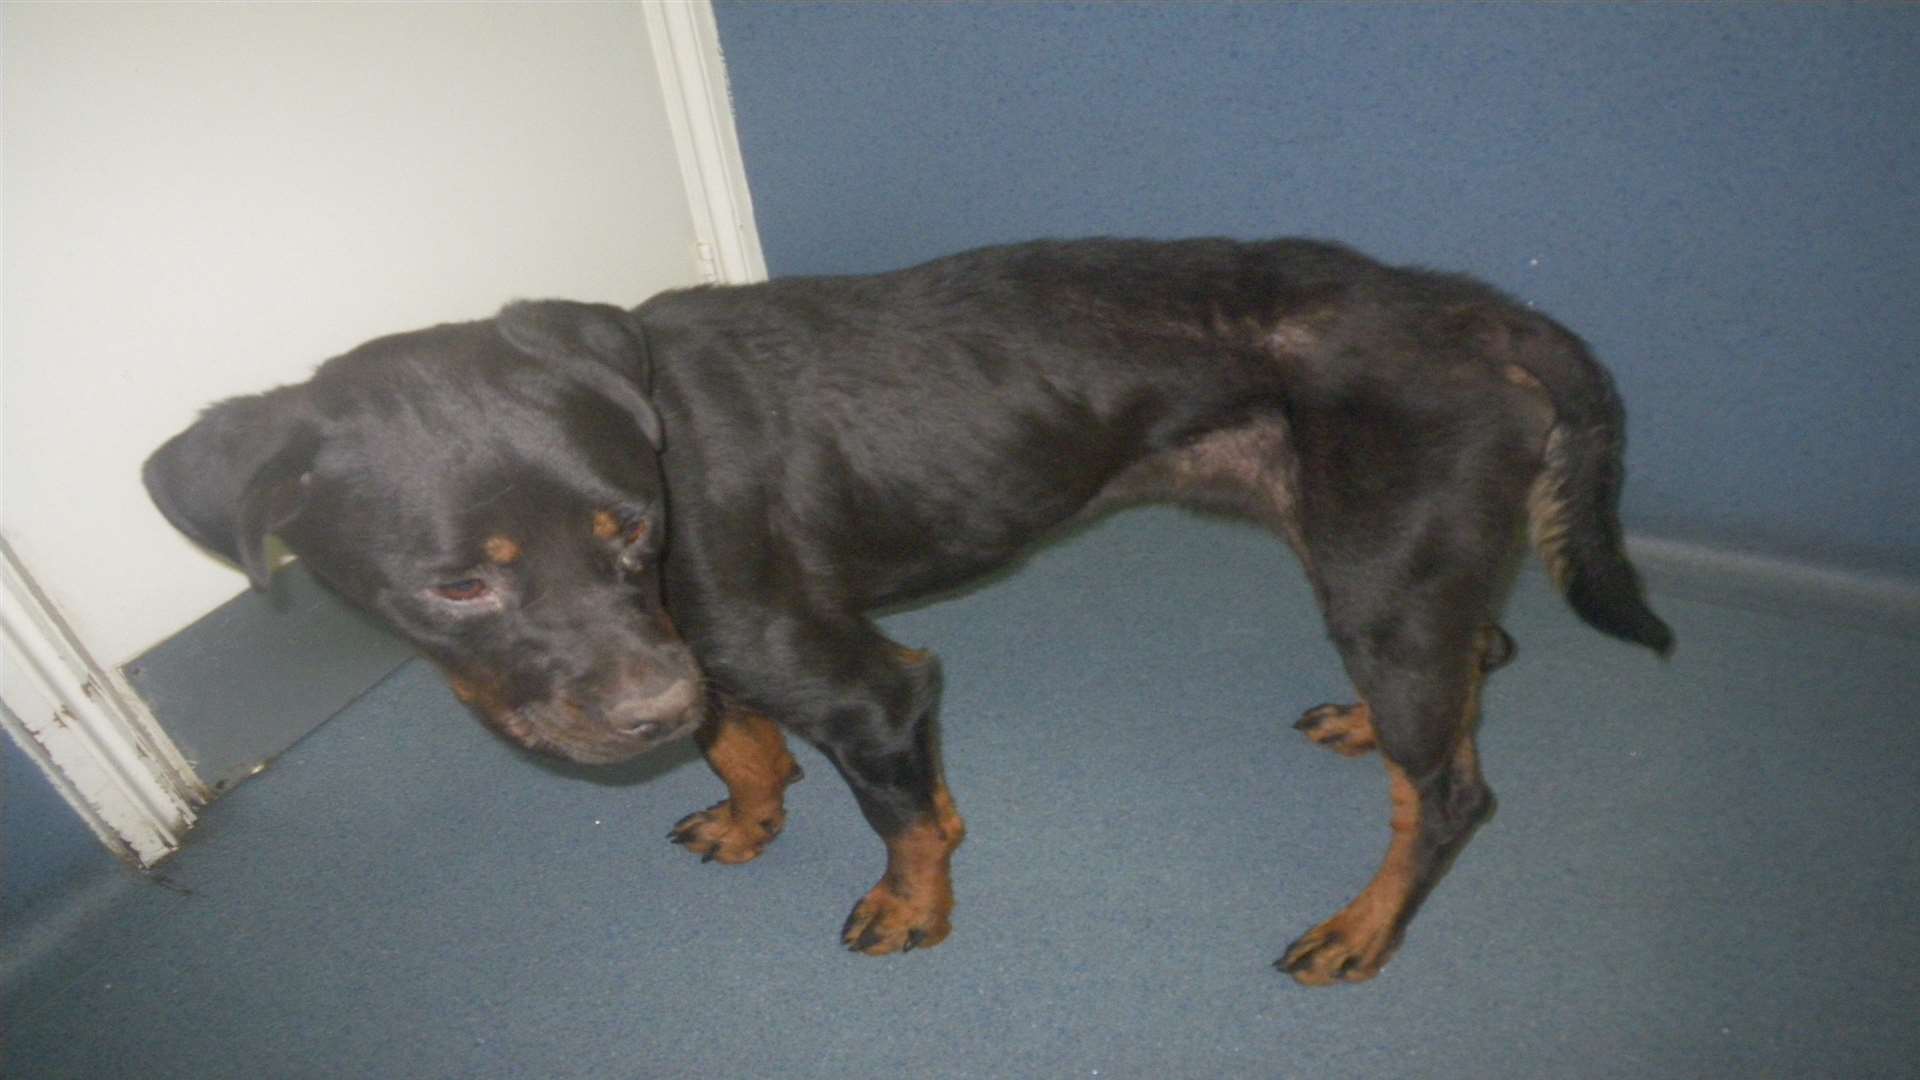 RSPCA officers took action after finding two year old rottweiller Bella emaciated and crawling with fleas